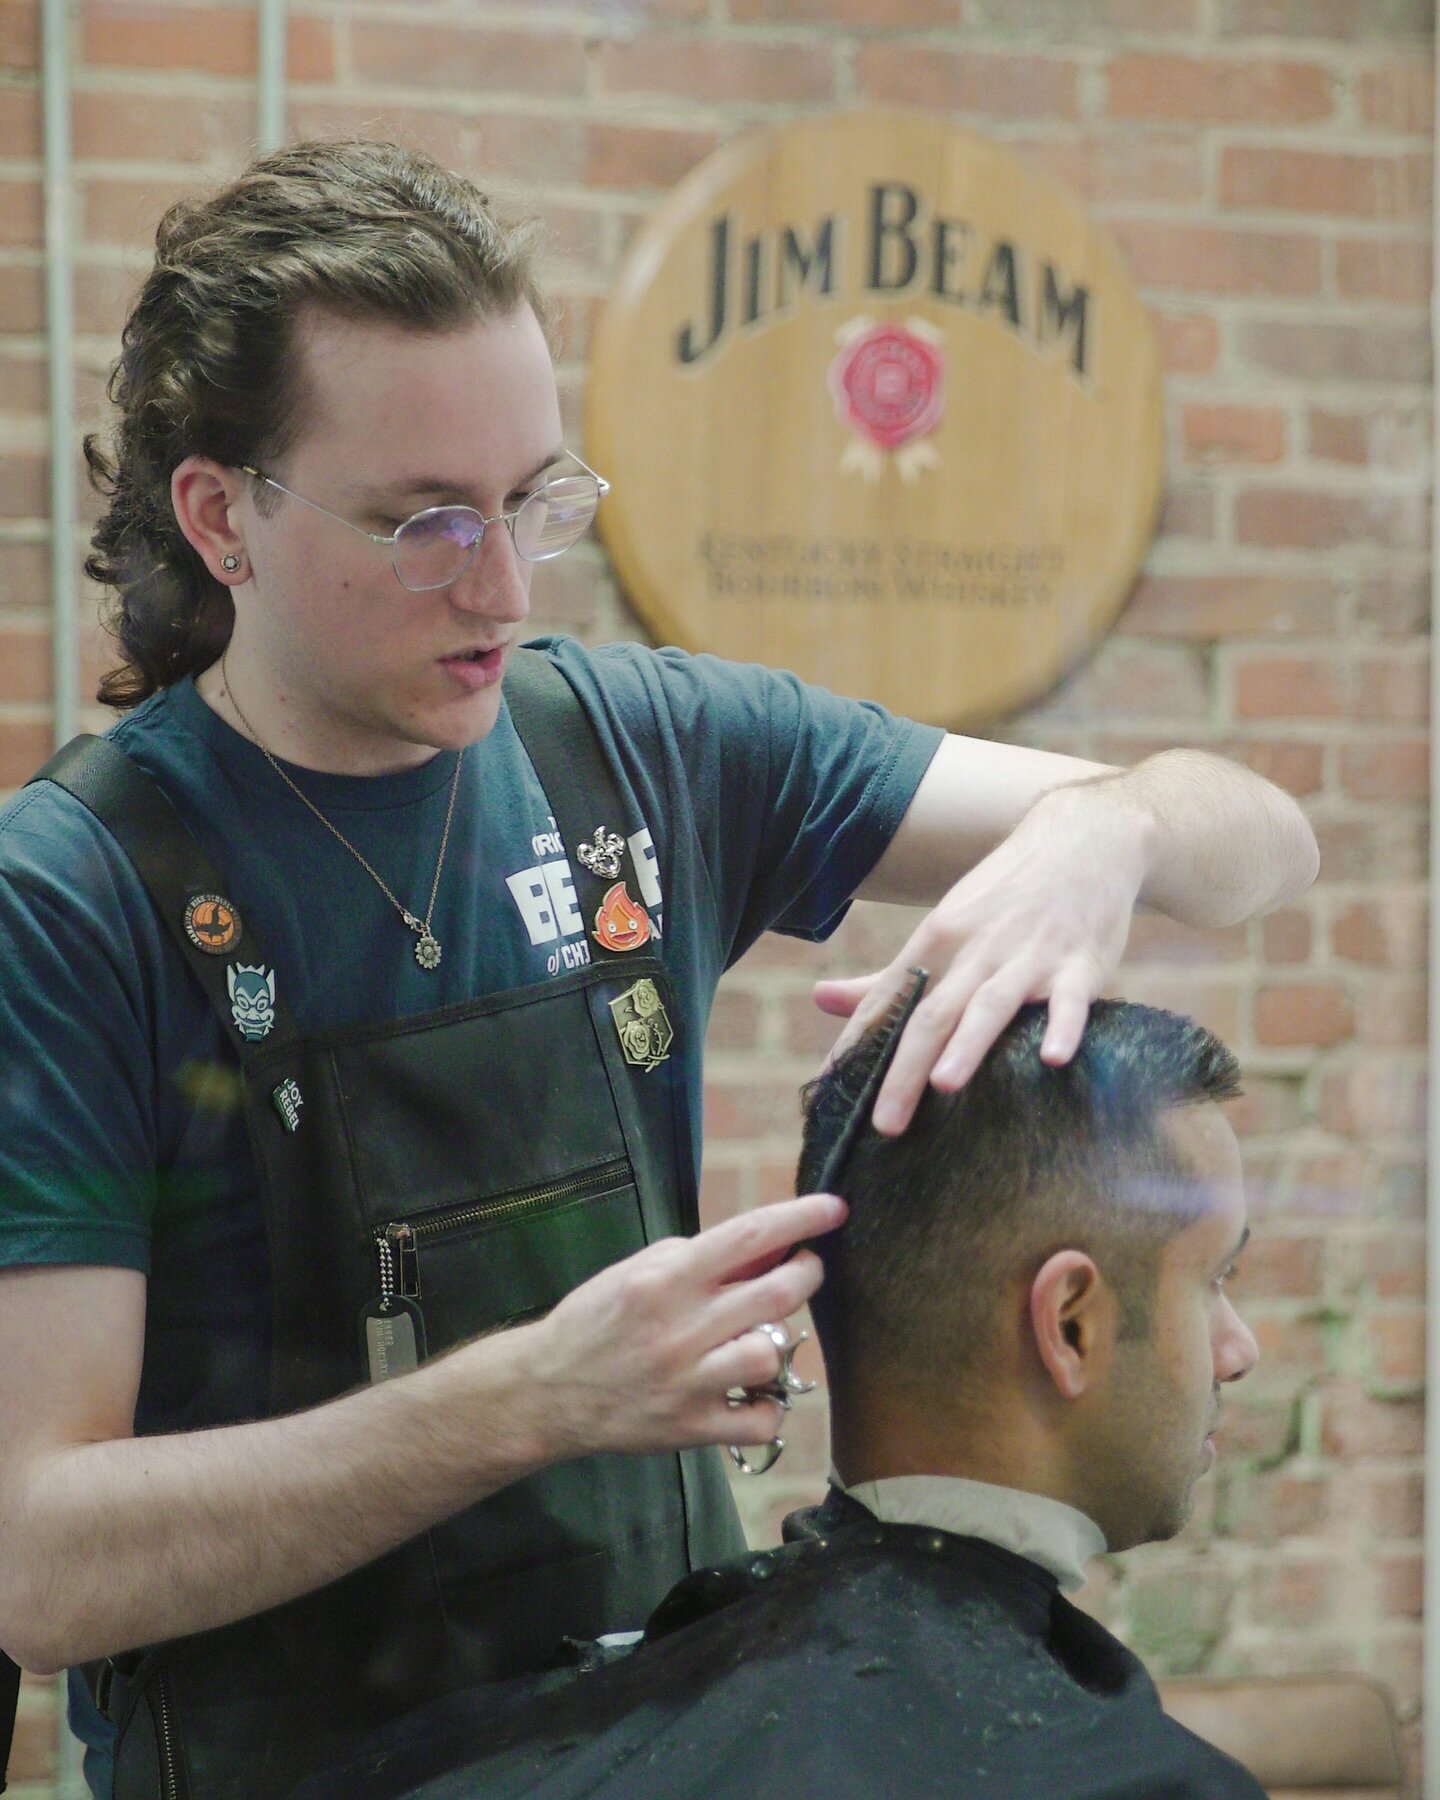 Finish this sentence: A good barber is like a good whiskey. They&rsquo;re both&hellip;
-
-
-
#theblockhousefranklin #barbershop #tnbarber #nashvillebarber #franklinfactory #workhard #franklintn #haircut #menshair #barber #barberlife #barberlove #barb